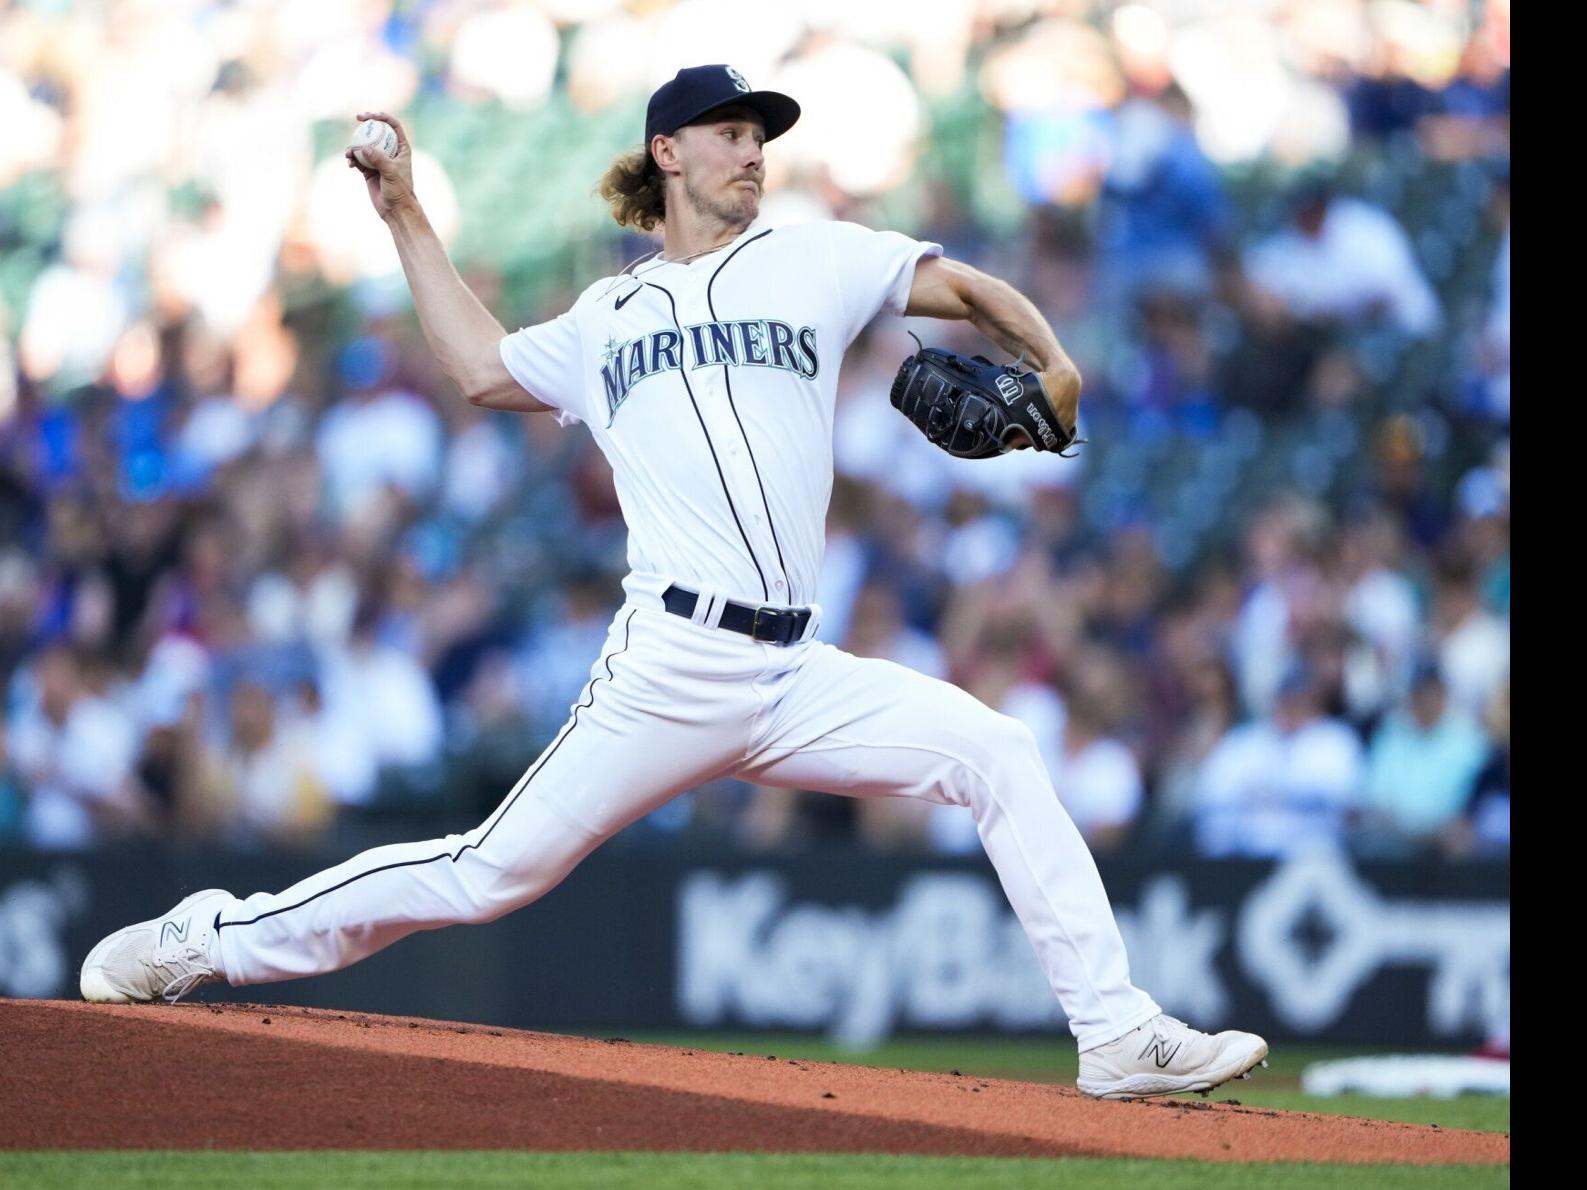 Mariners fall to Red Sox, fail to take advantage of losses by